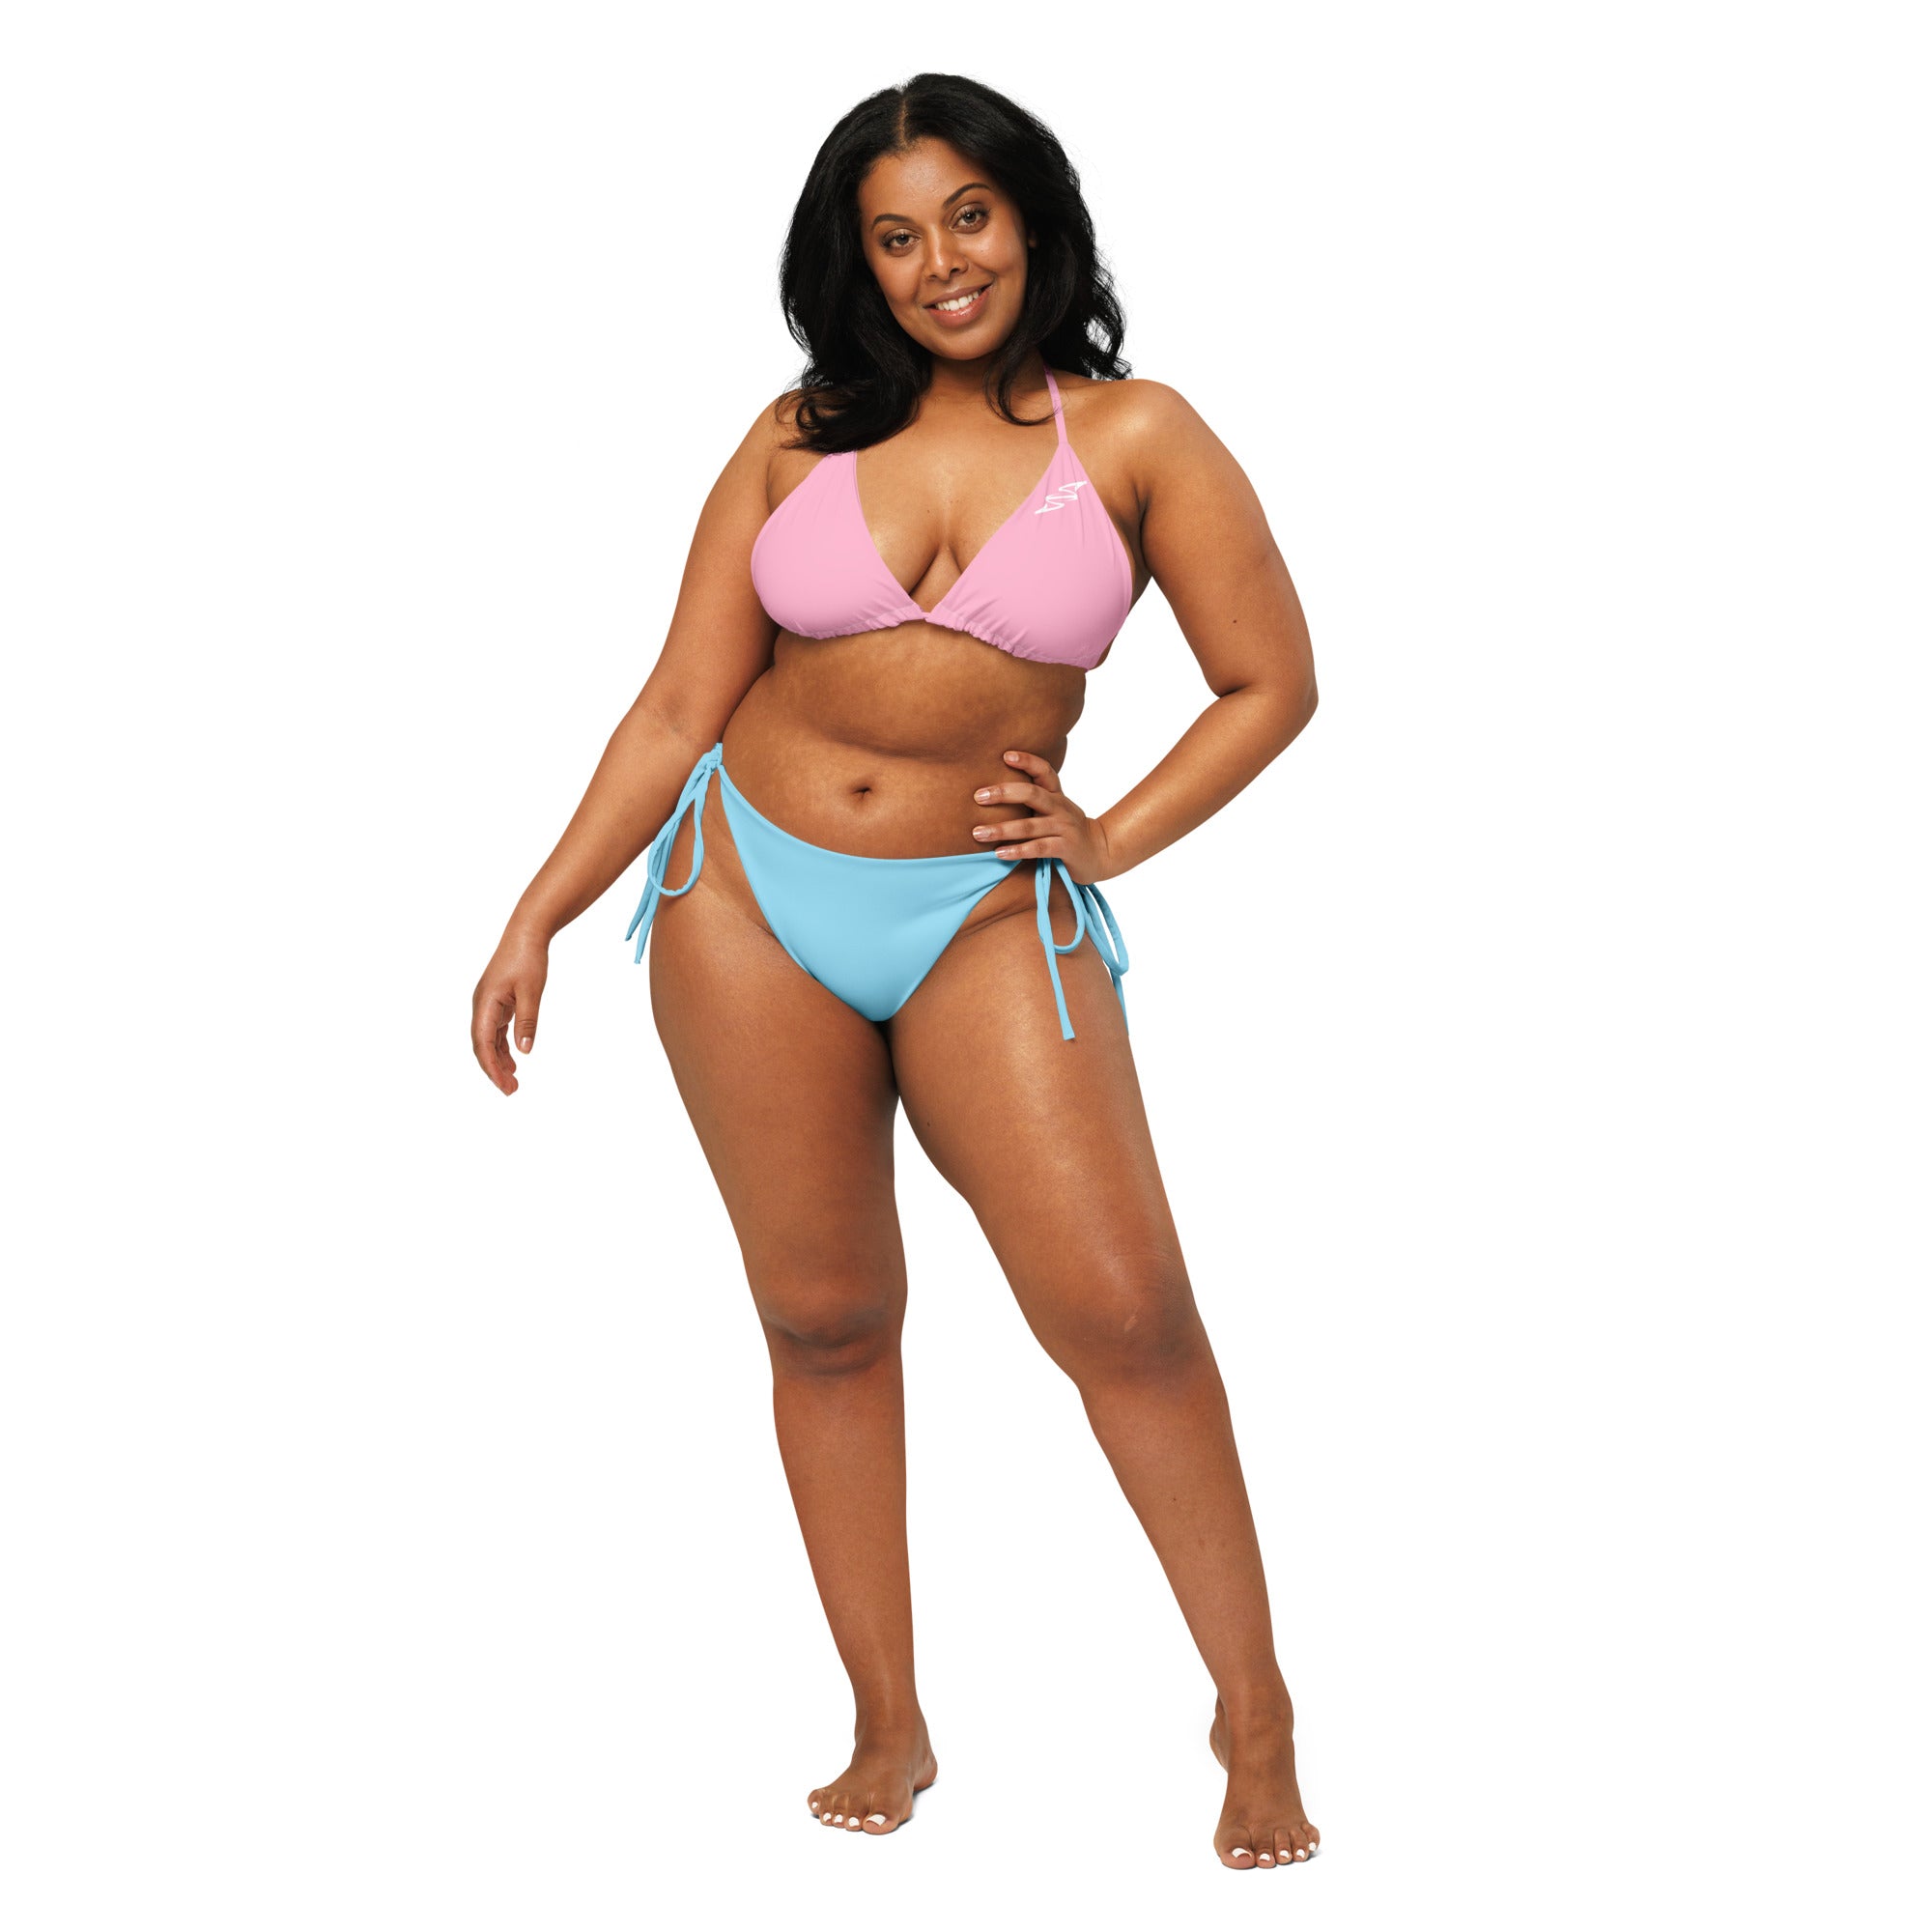 SPRY SZN Two-Piece Swimsuit - Cotton Candy Pink Top - Columbia Blue Bottom